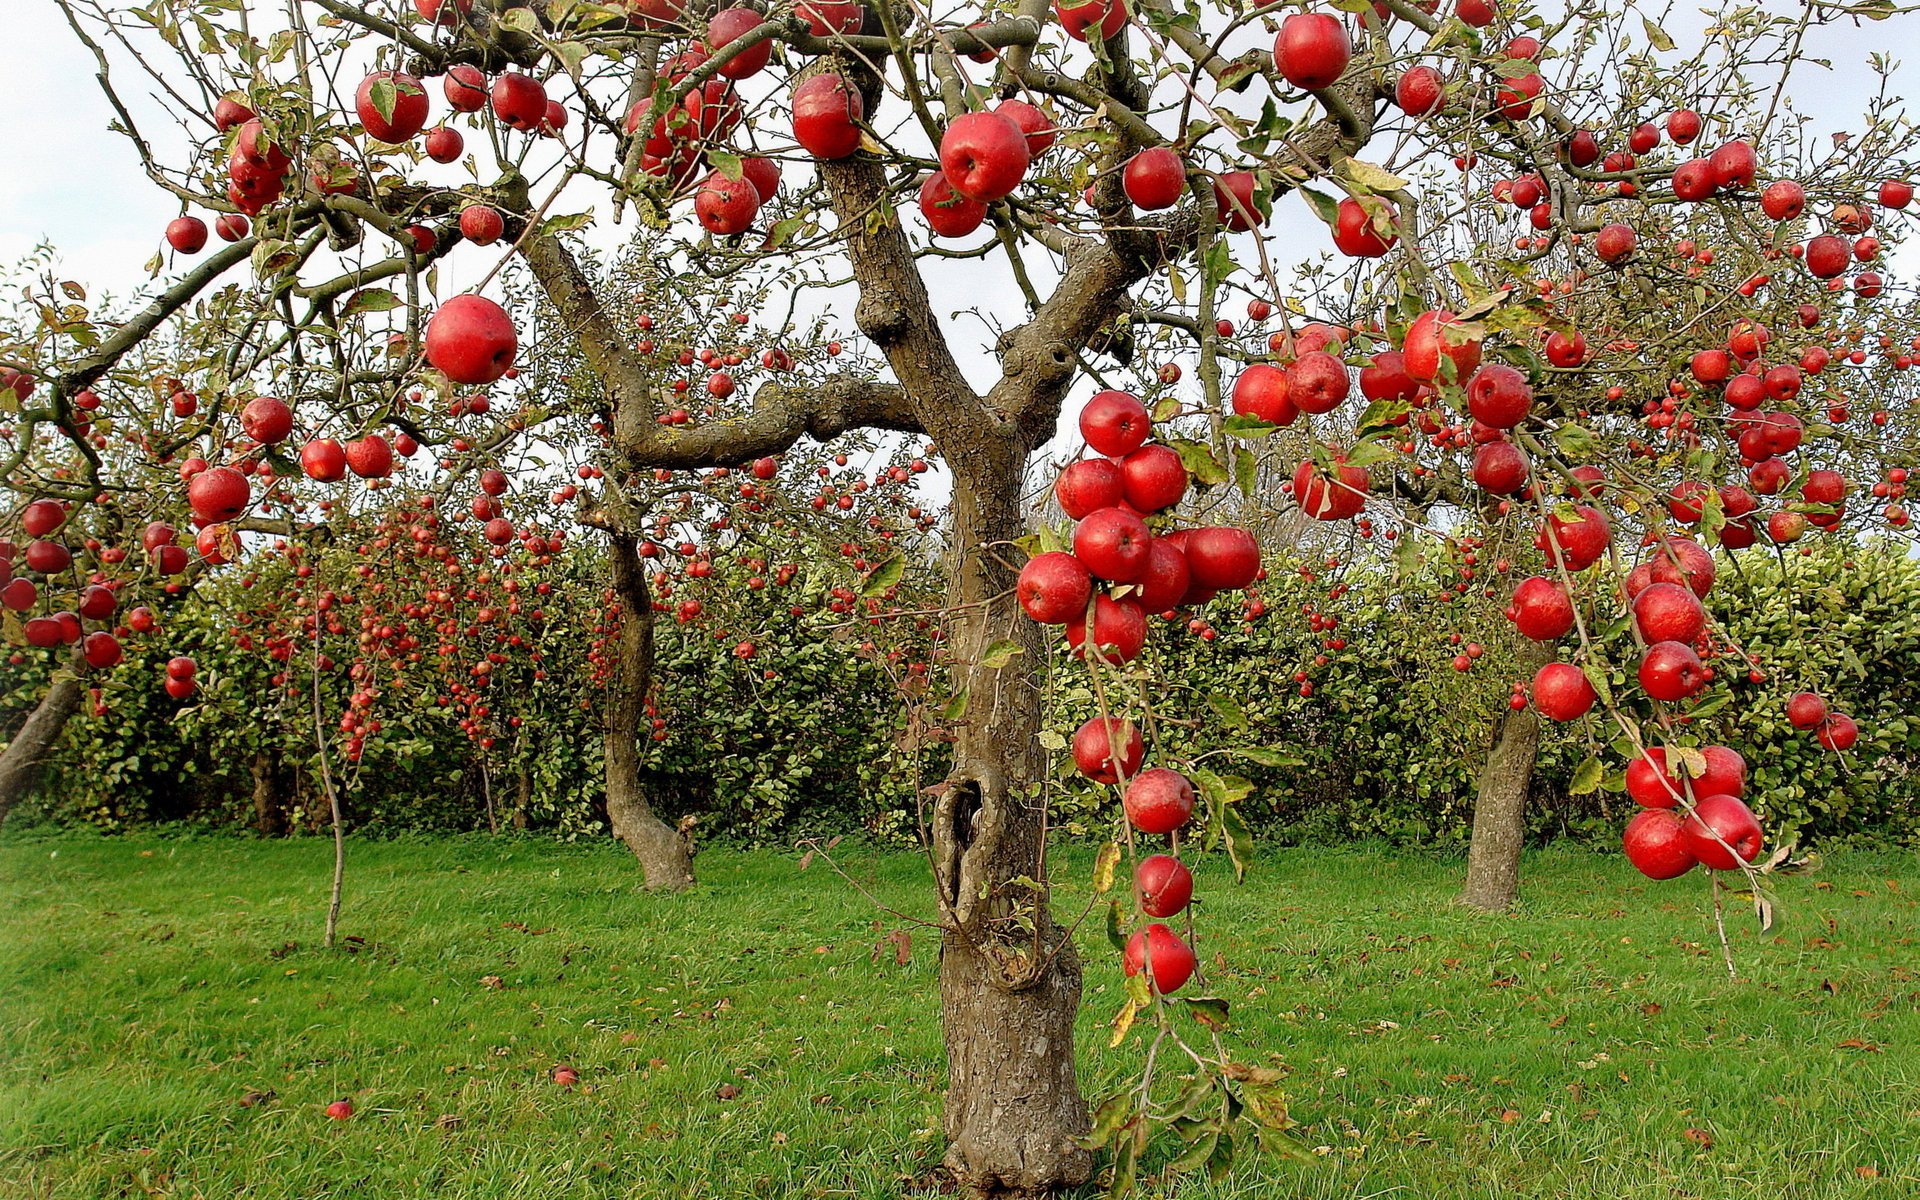 Autumn apples with red apples